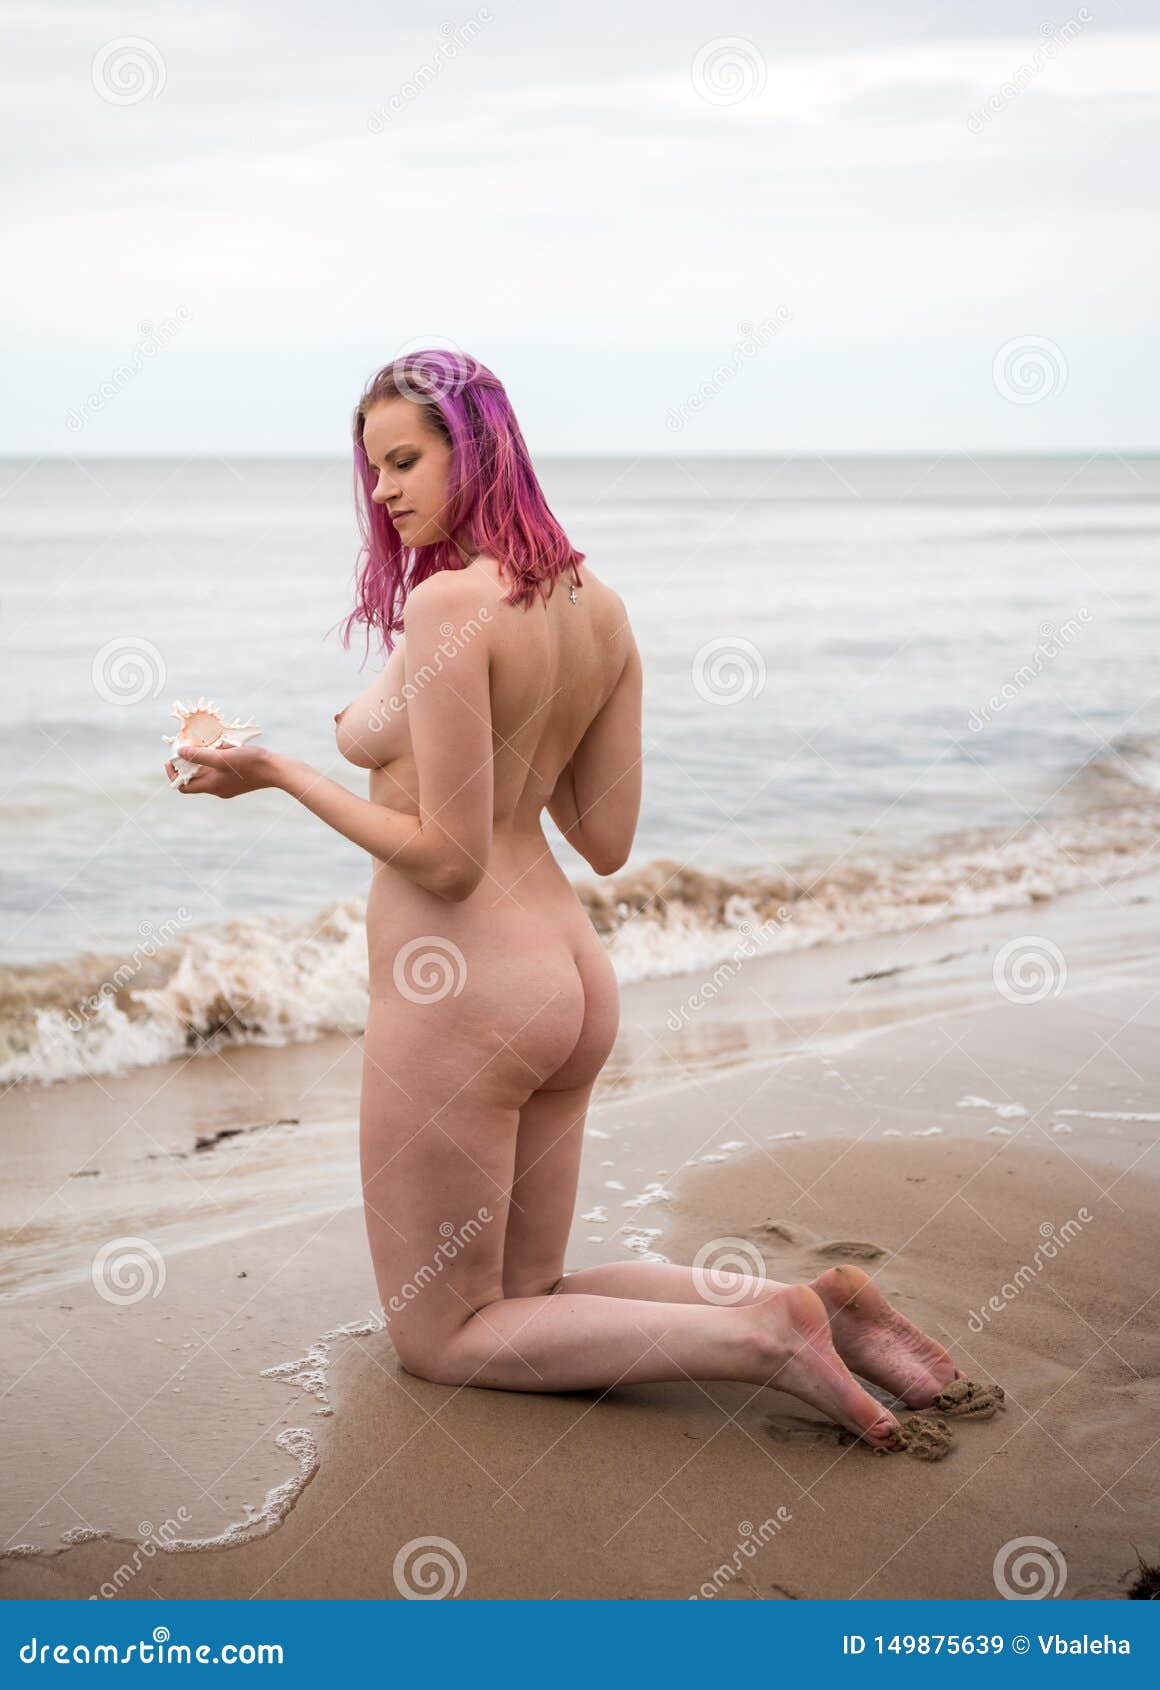 Women the naked pics at beach The Wet